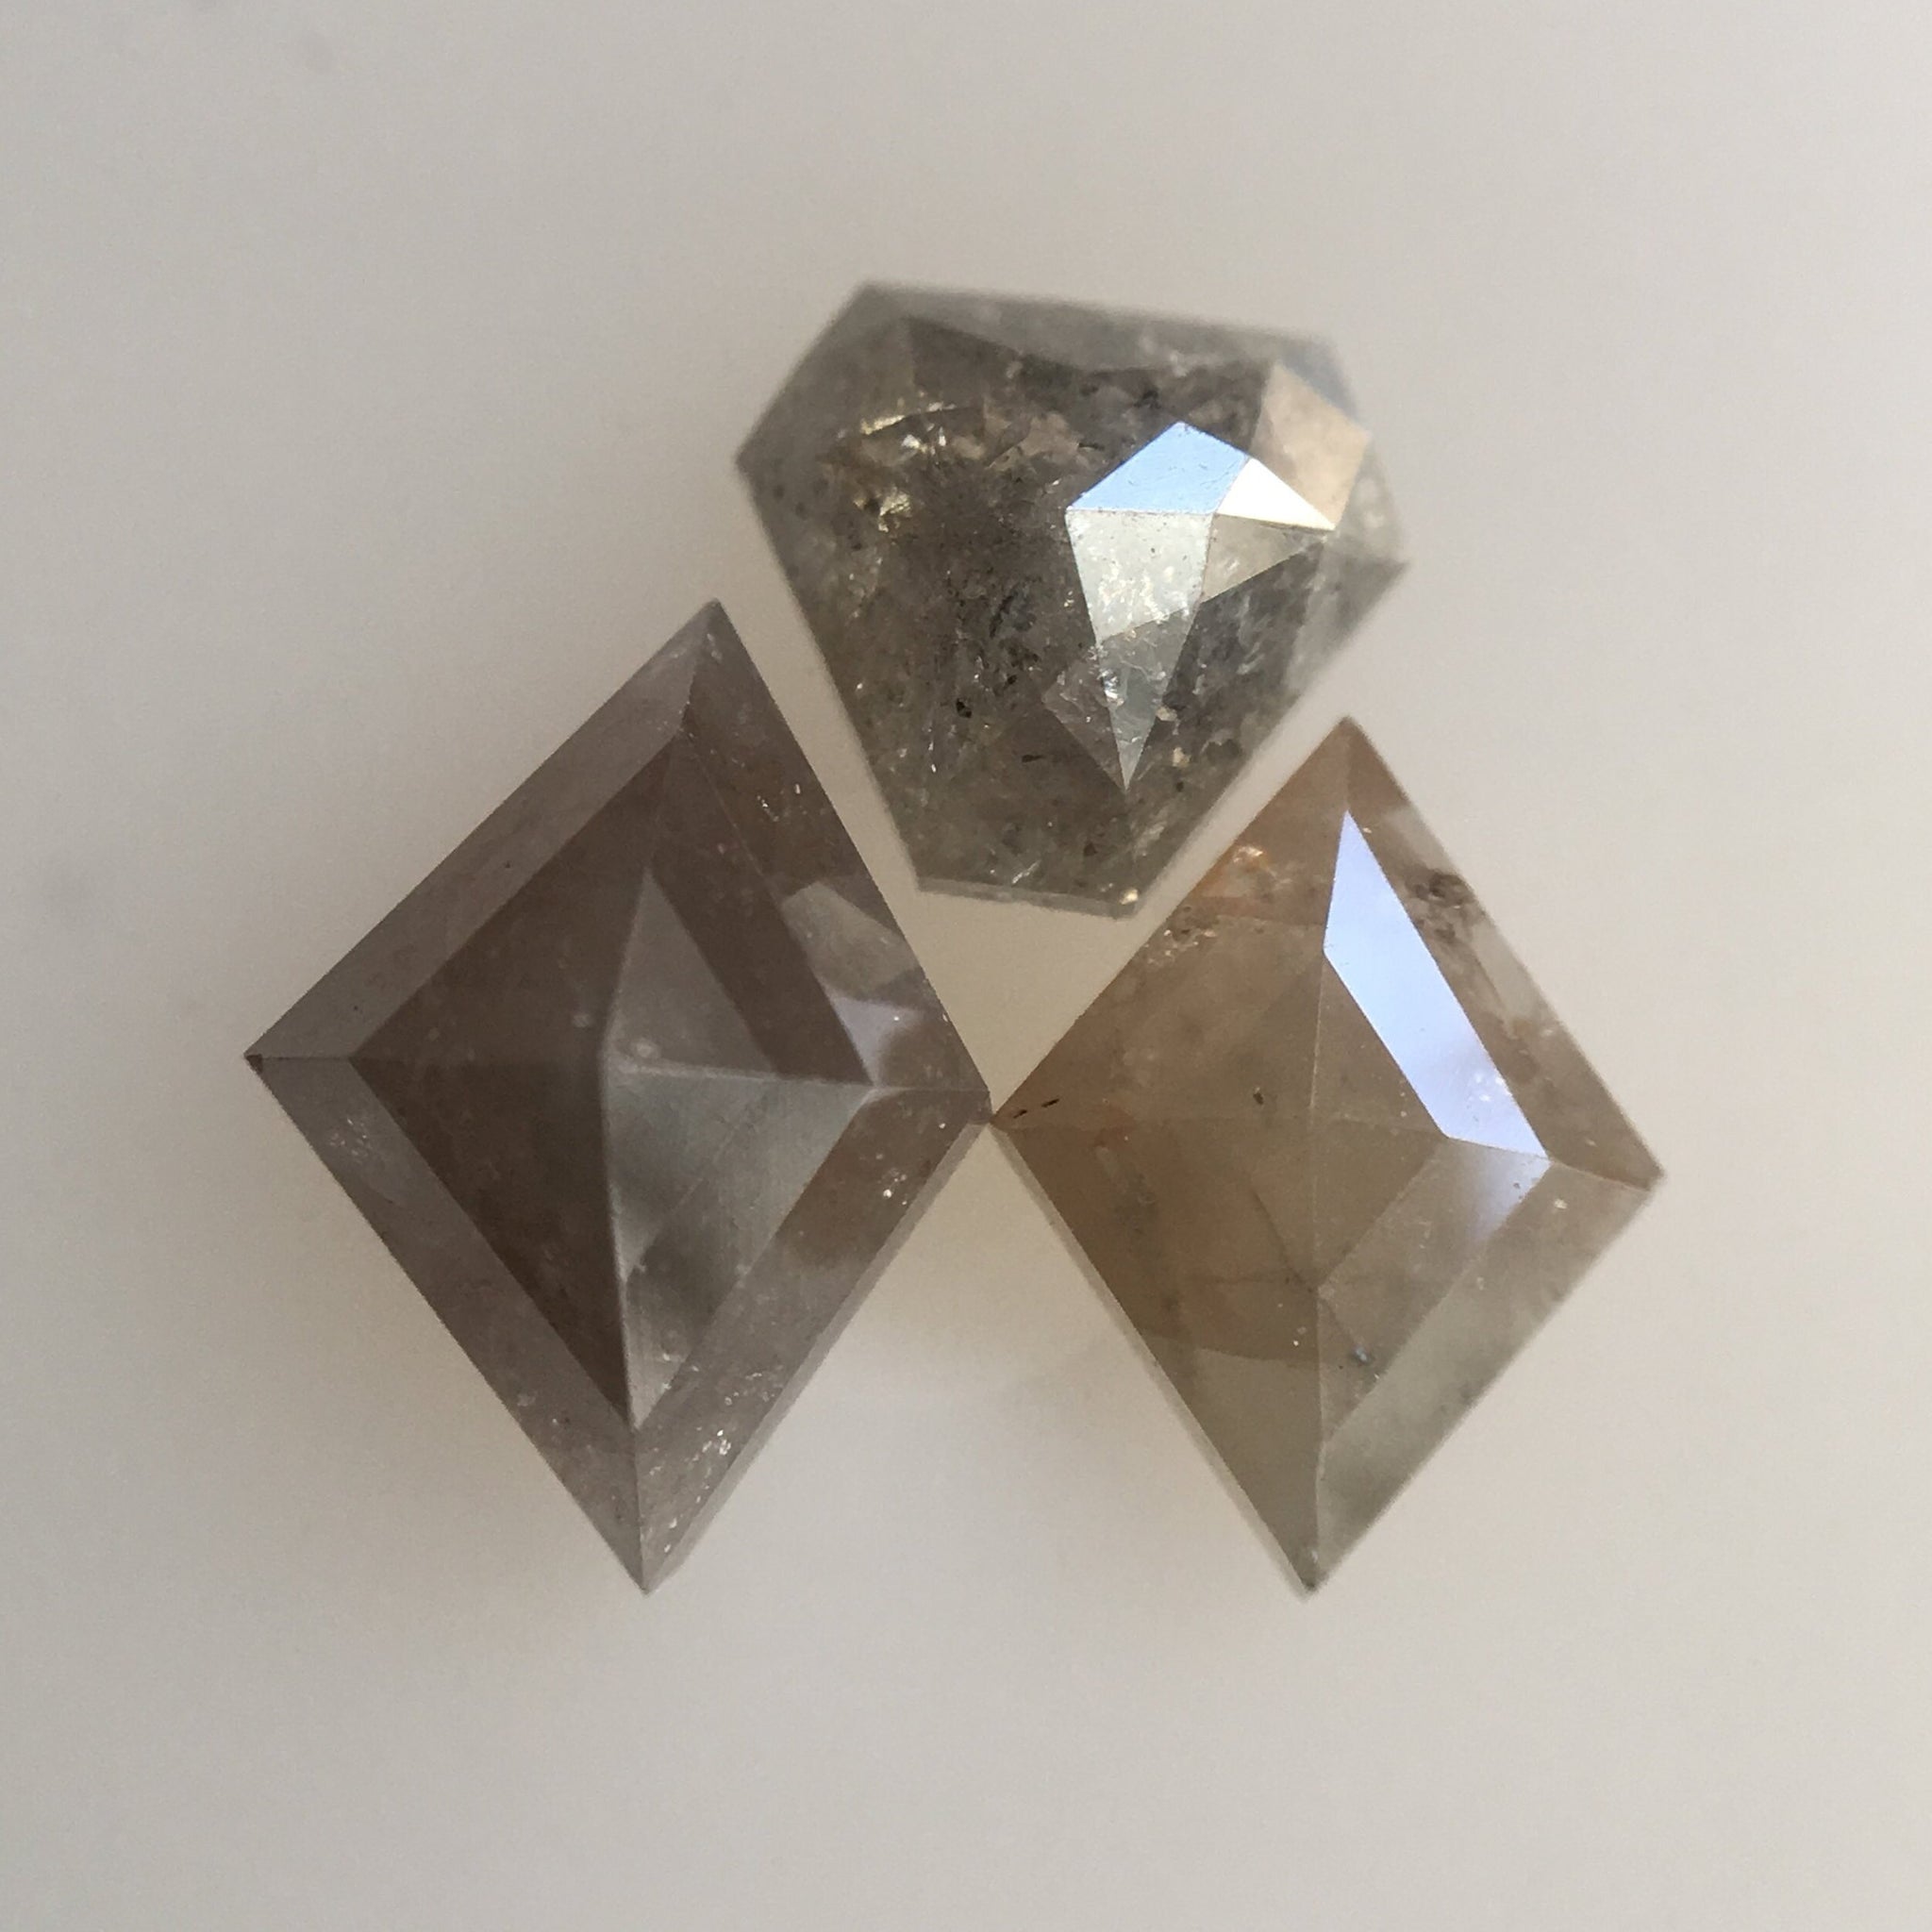 Genuine 1.69 Ct, 3 Pcs of Fancy Mix Shape Mix Color Natural Loose Diamond Beautiful sparkling faceted perfect for Jewelry AJ03/31